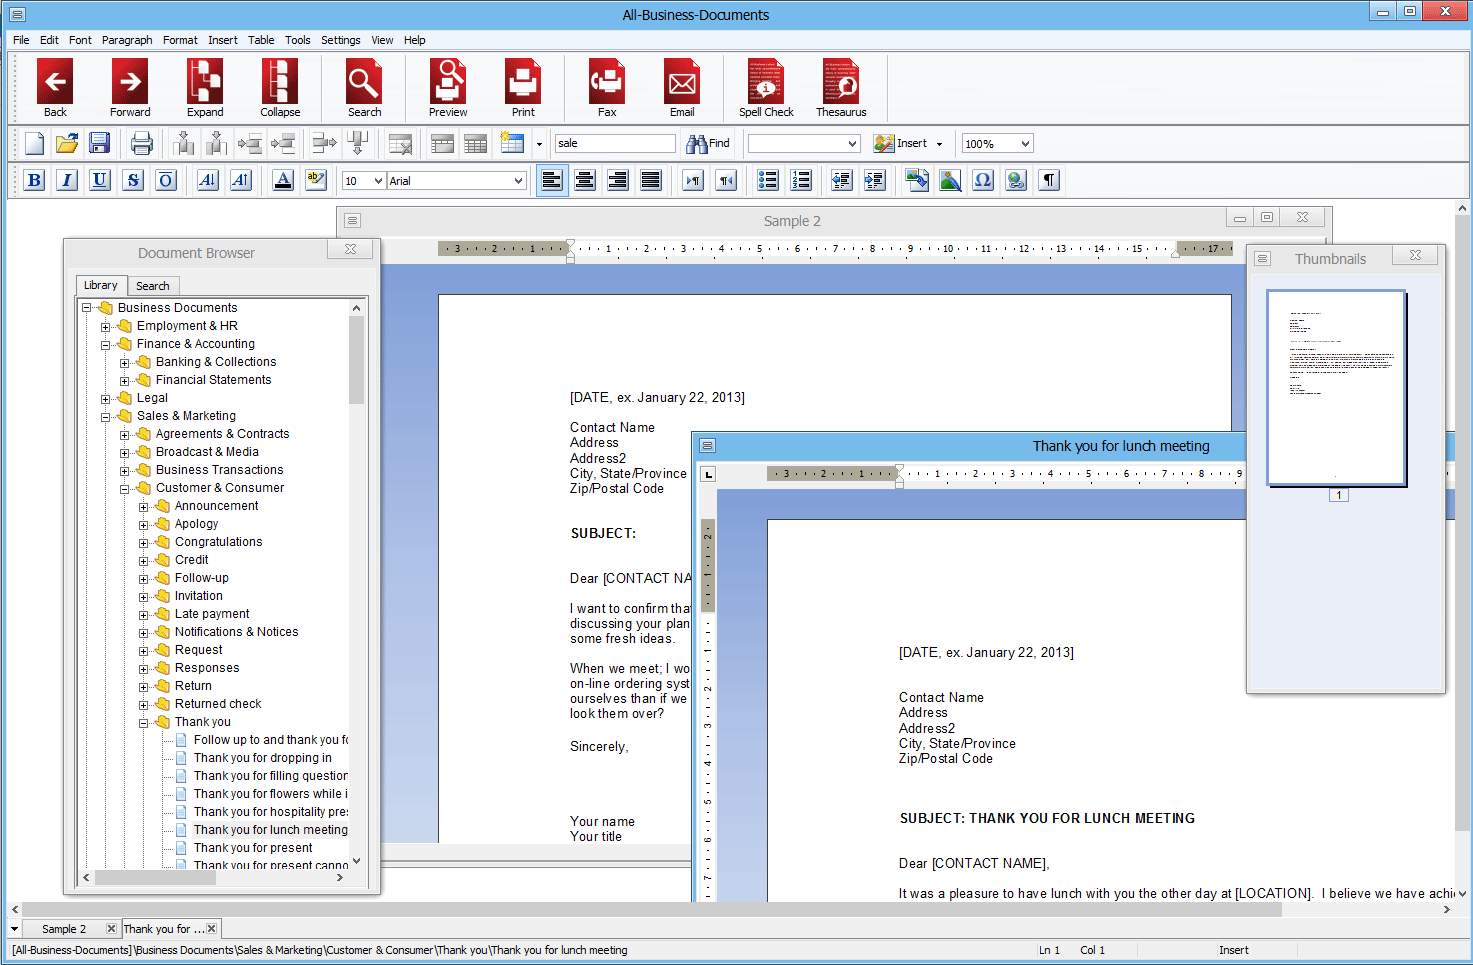 All-Business-Documents for Windows